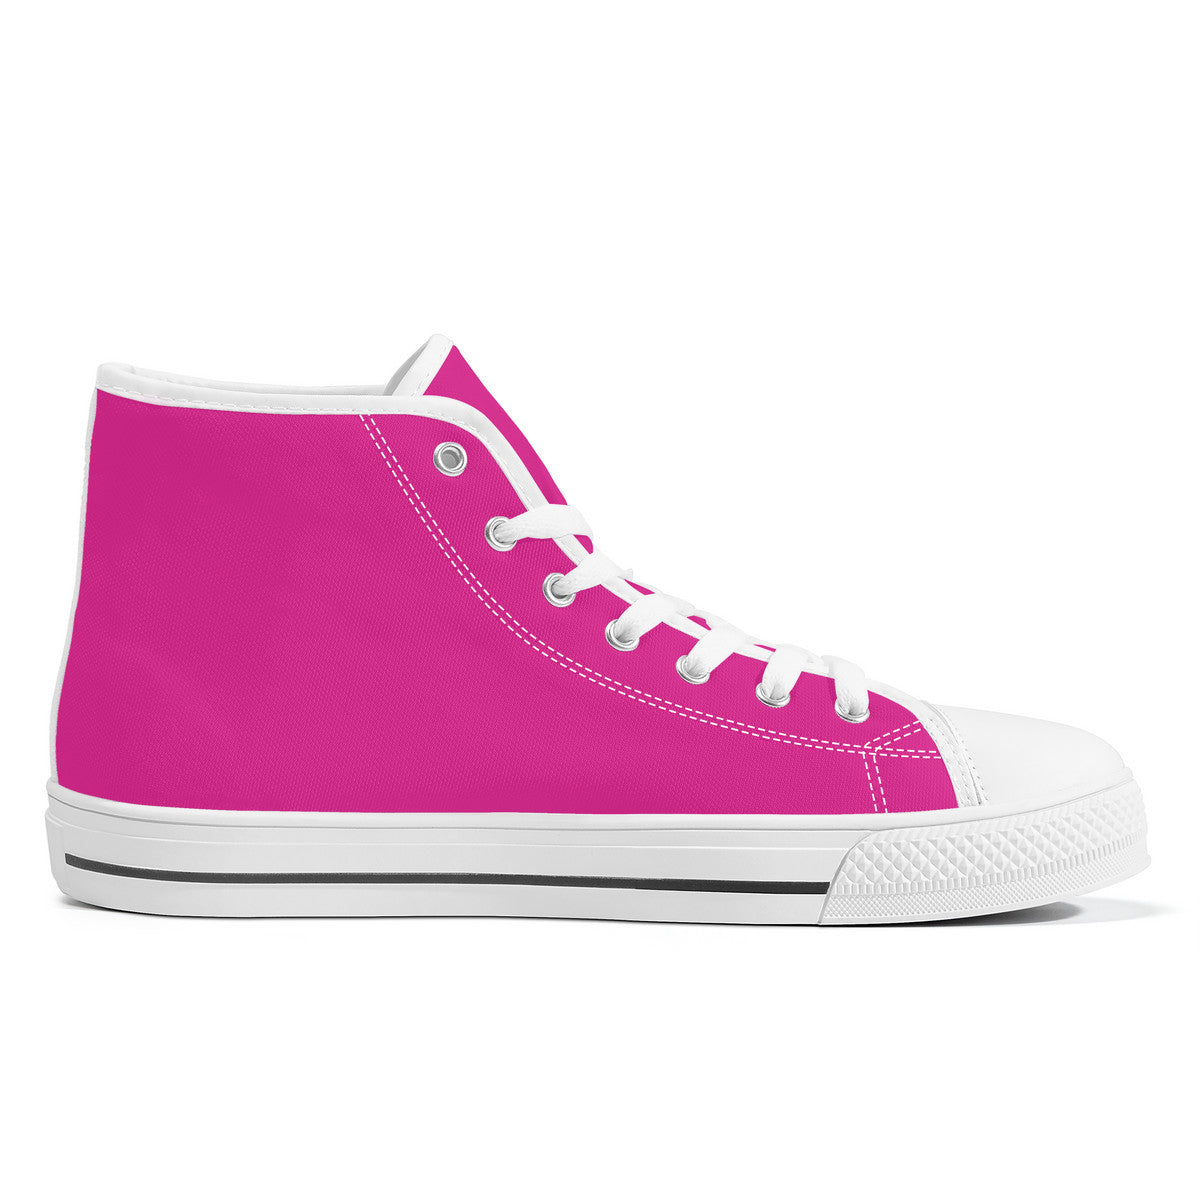 Work Hard Be Kind - Pink Converse Style High Tops